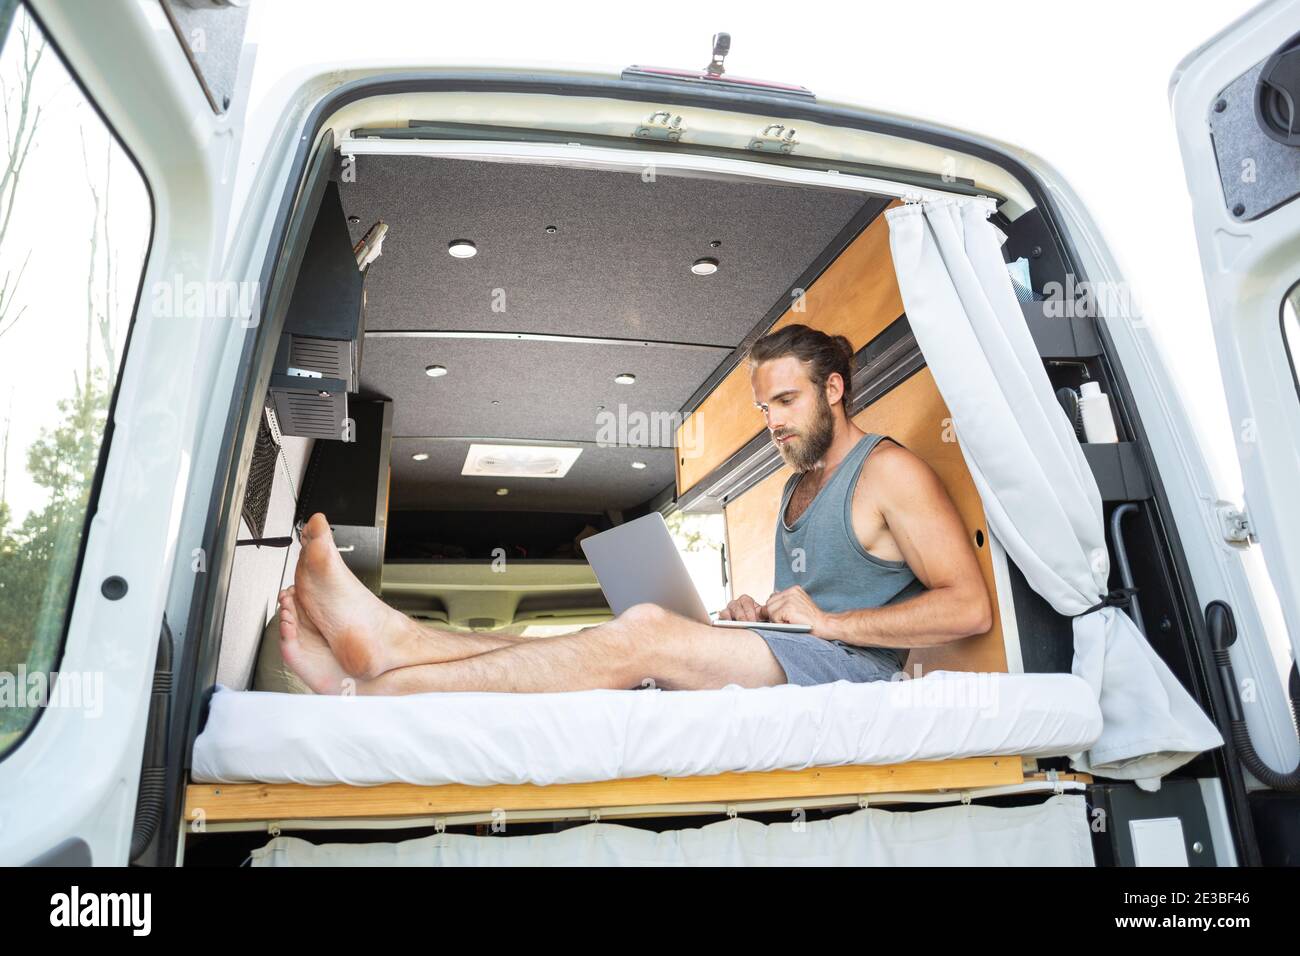 Man relaxing inside his camper van uses a laptop computer Stock Photo